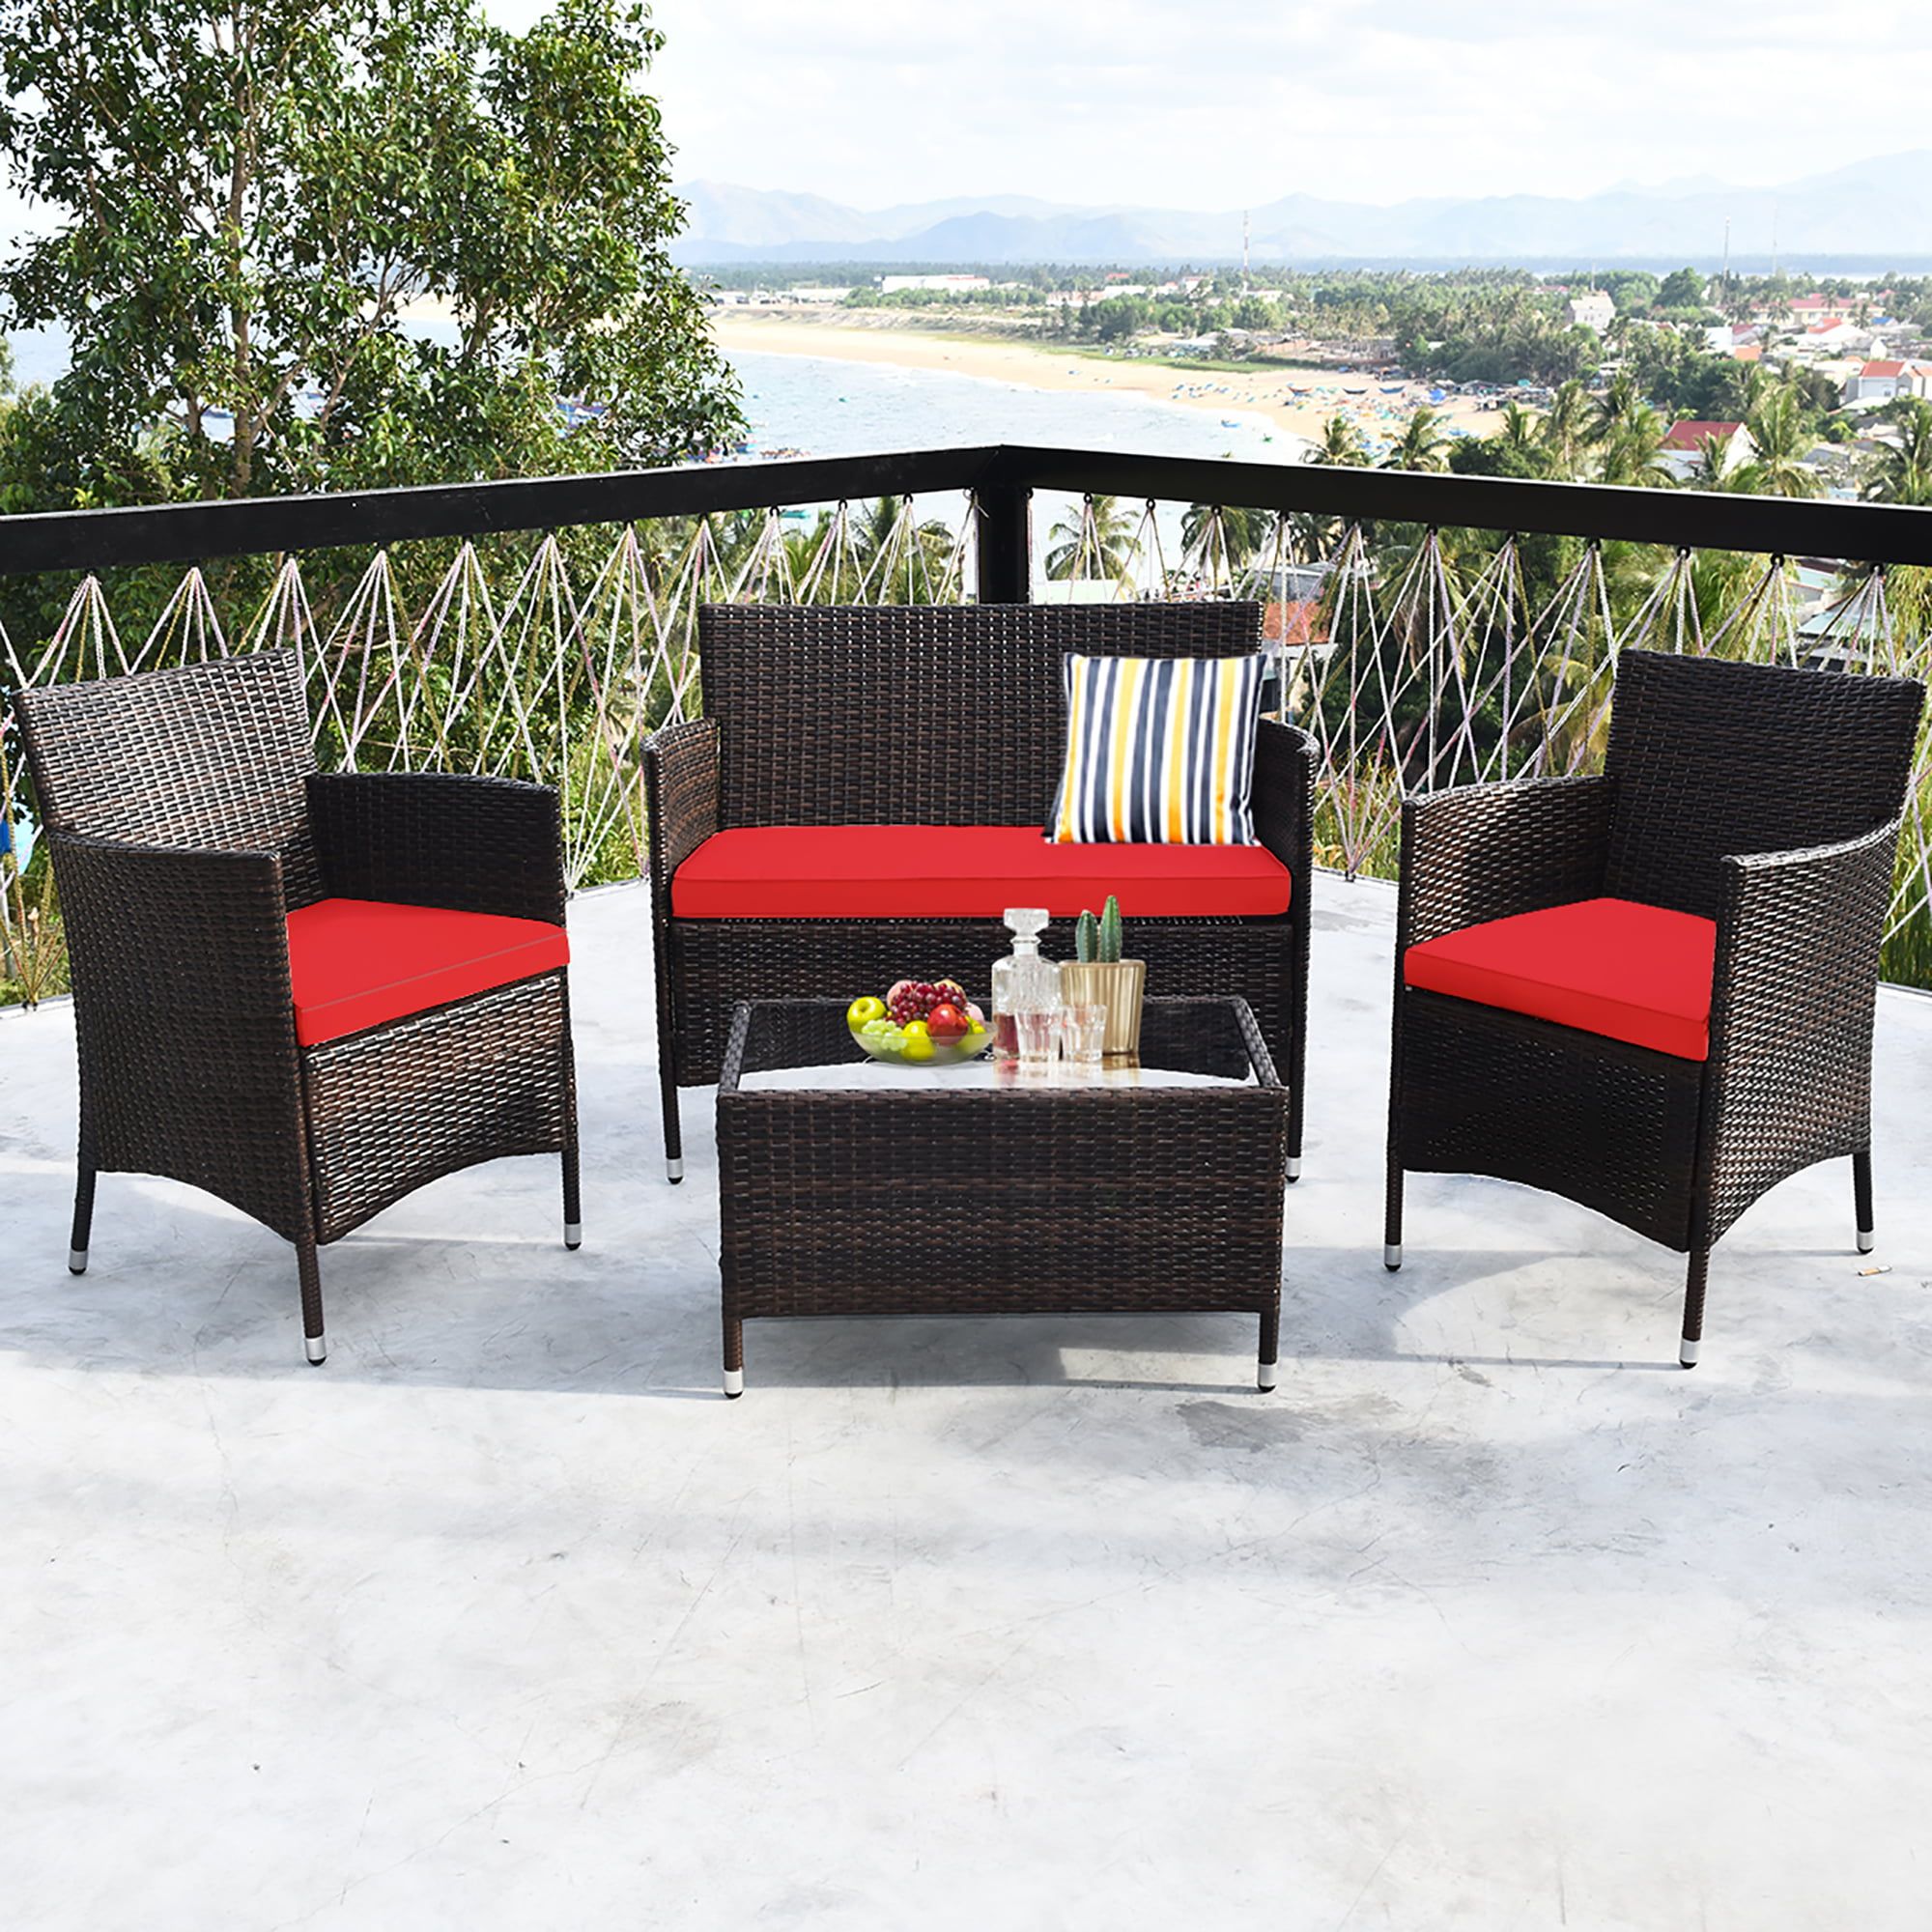 Costway 4pcs Rattan Patio Furniture Set Cushioned Sofa Chair Coffee Pertaining To 4pcs Rattan Patio Coffee Tables (View 2 of 20)